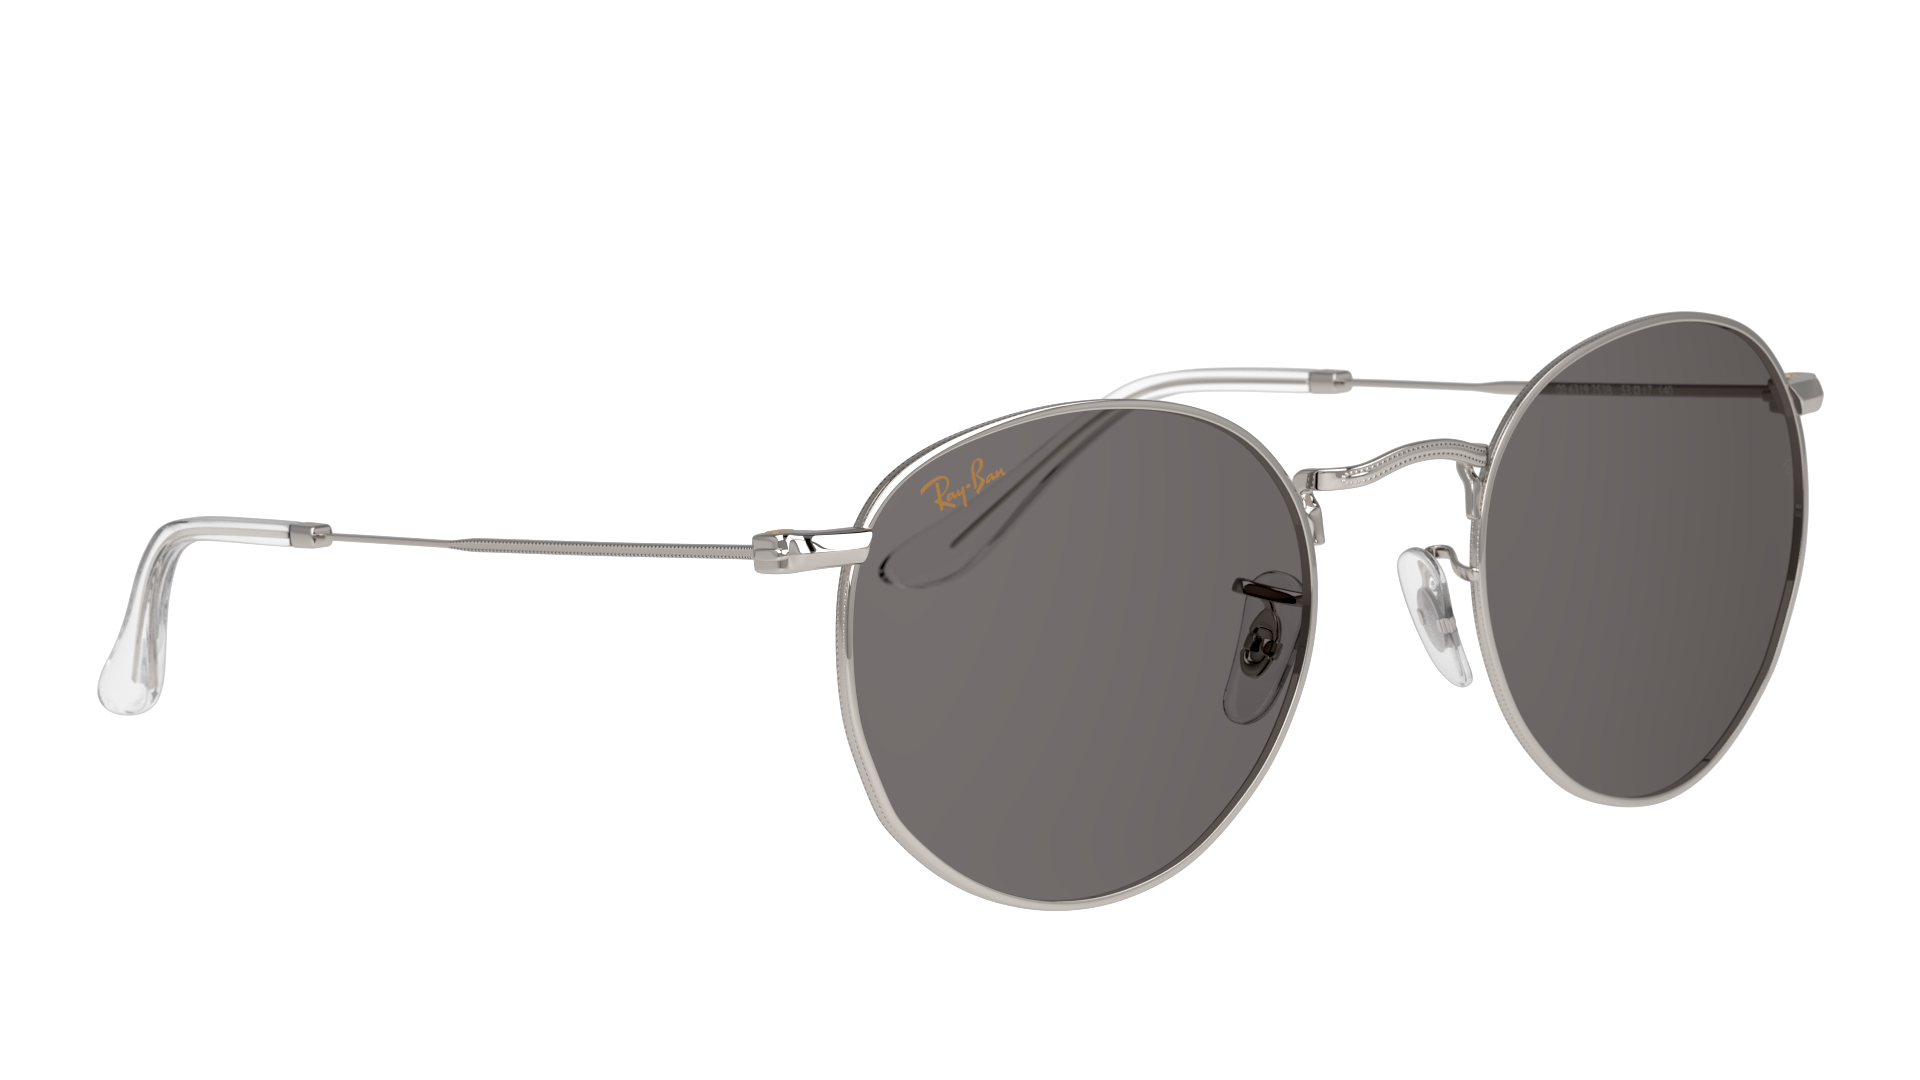 Angle_Right01 Ray-Ban Round Metal Legend Gold RB3447 9196R5 Blauw / Goud